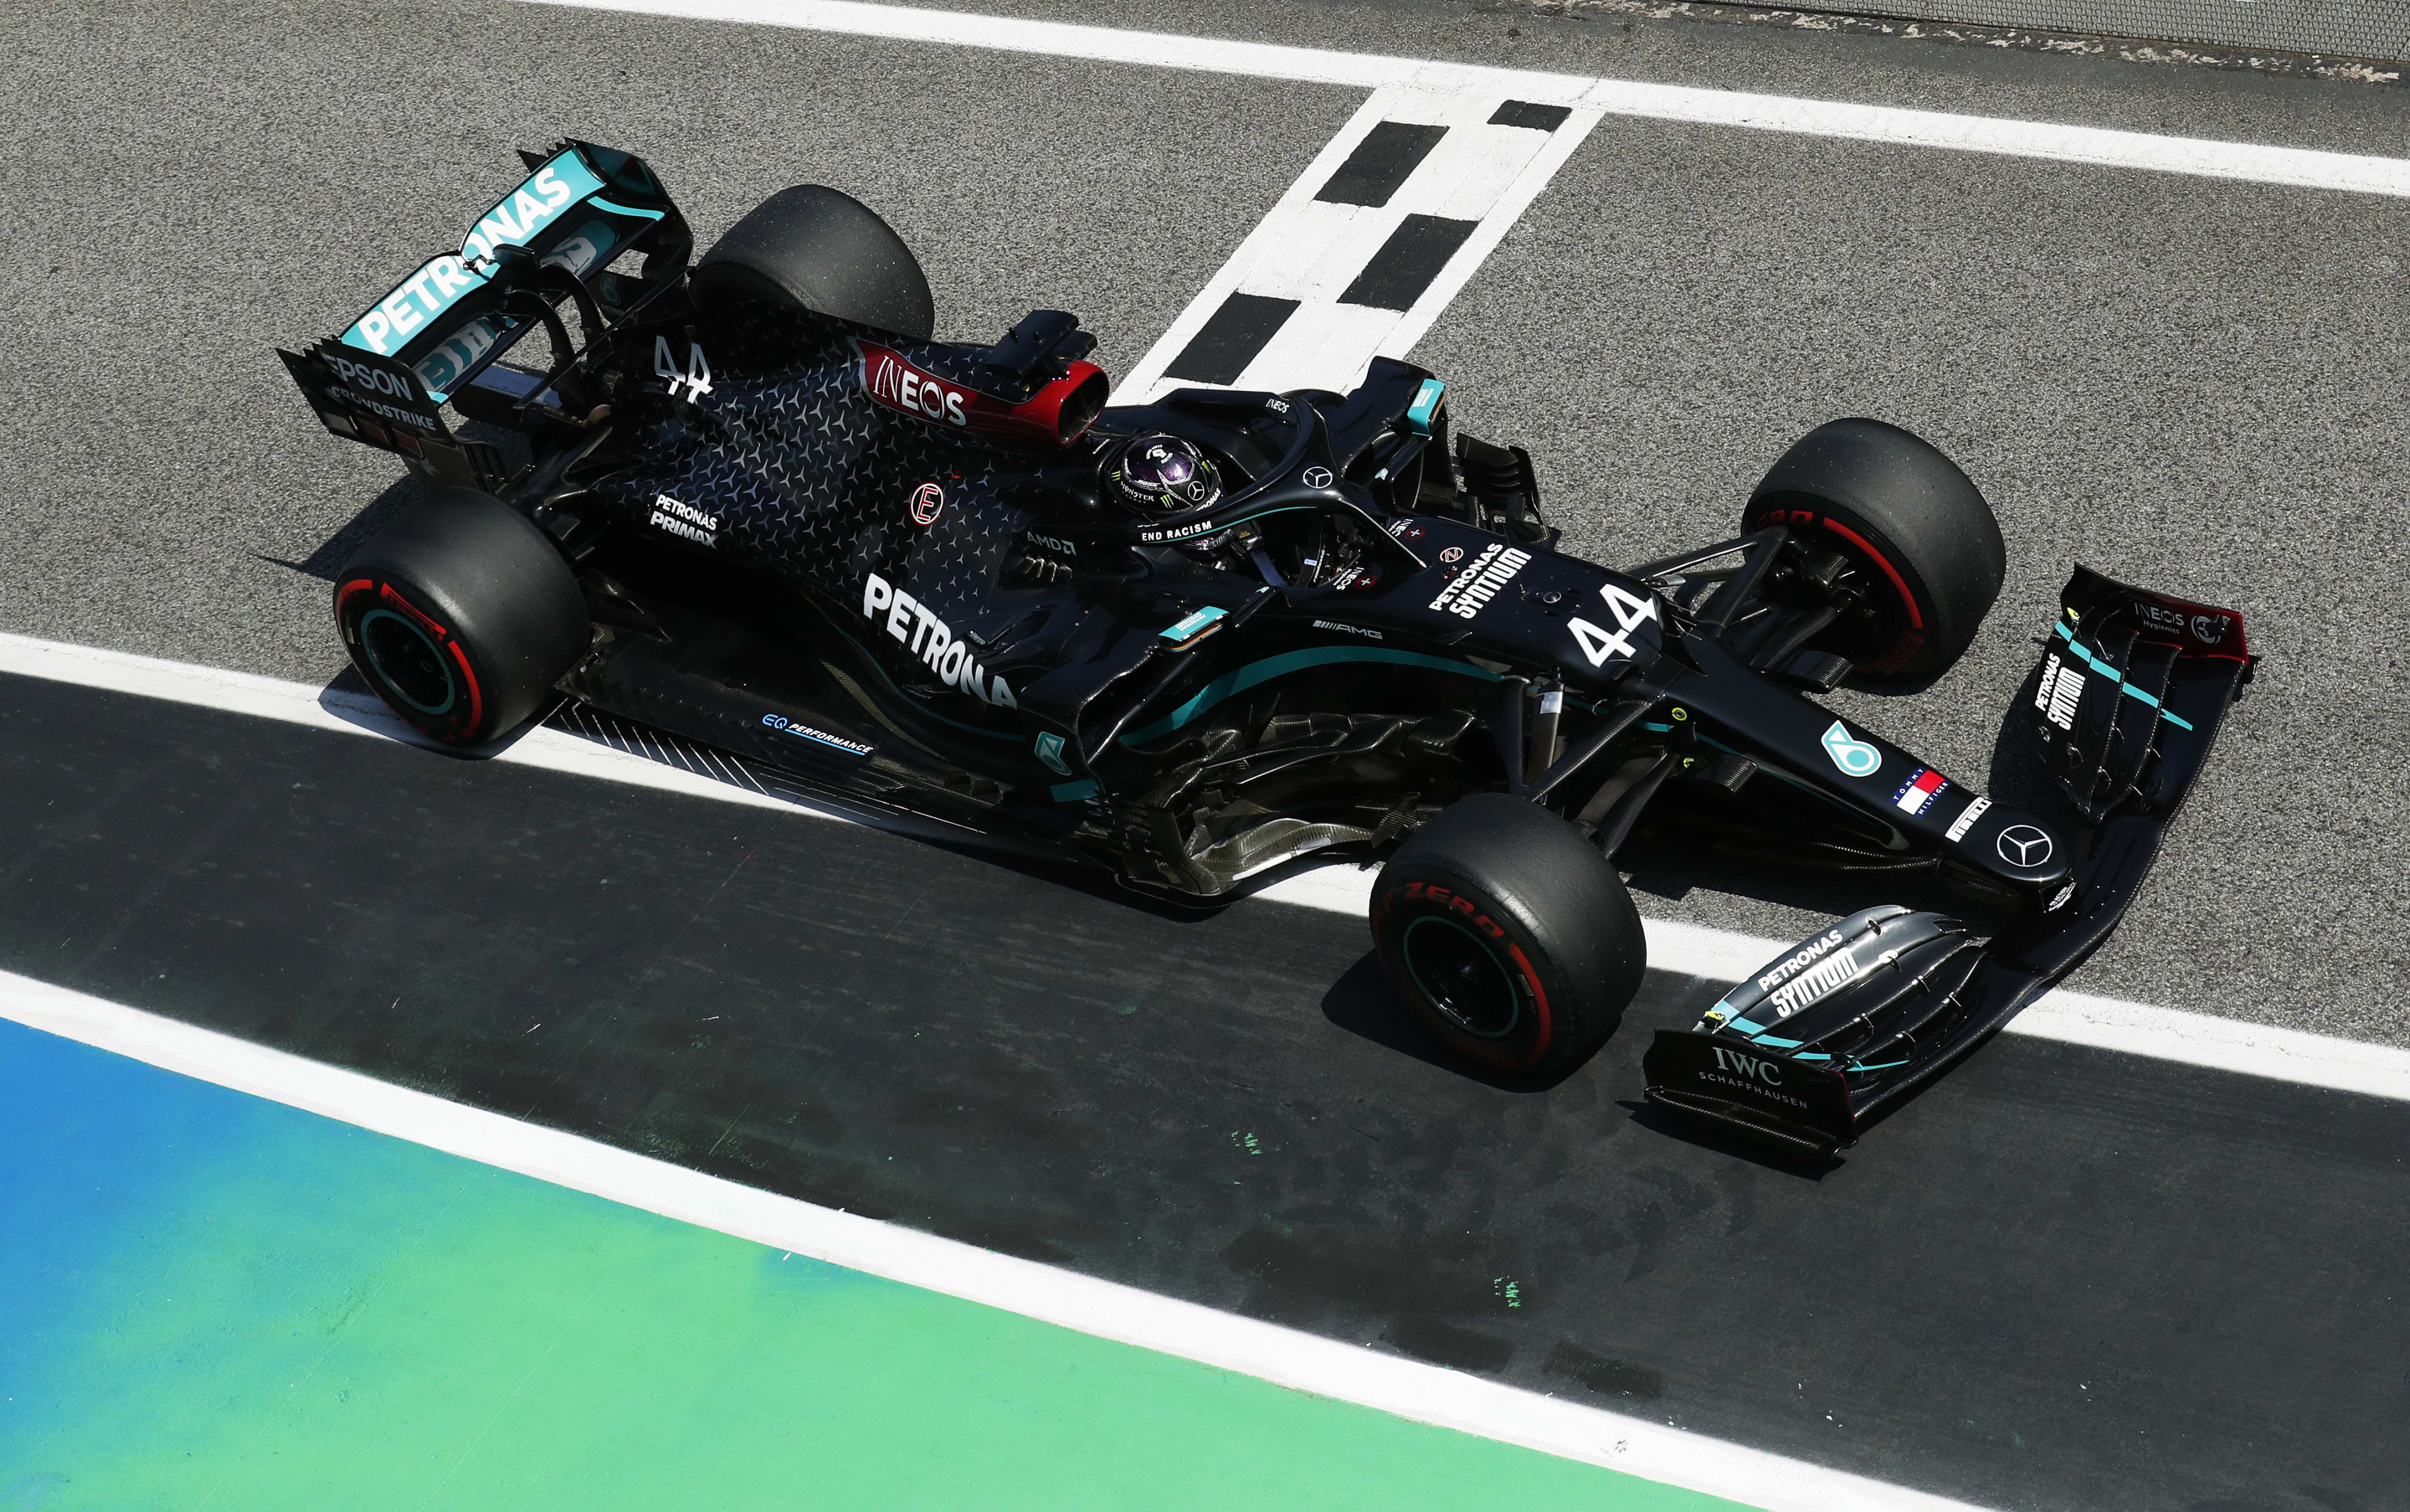 Qualifying Report Hamilton Beats Bottas To Pole In Sweltering Spanish Gp Qualifying As Verstappen Takes P3 Formula 1